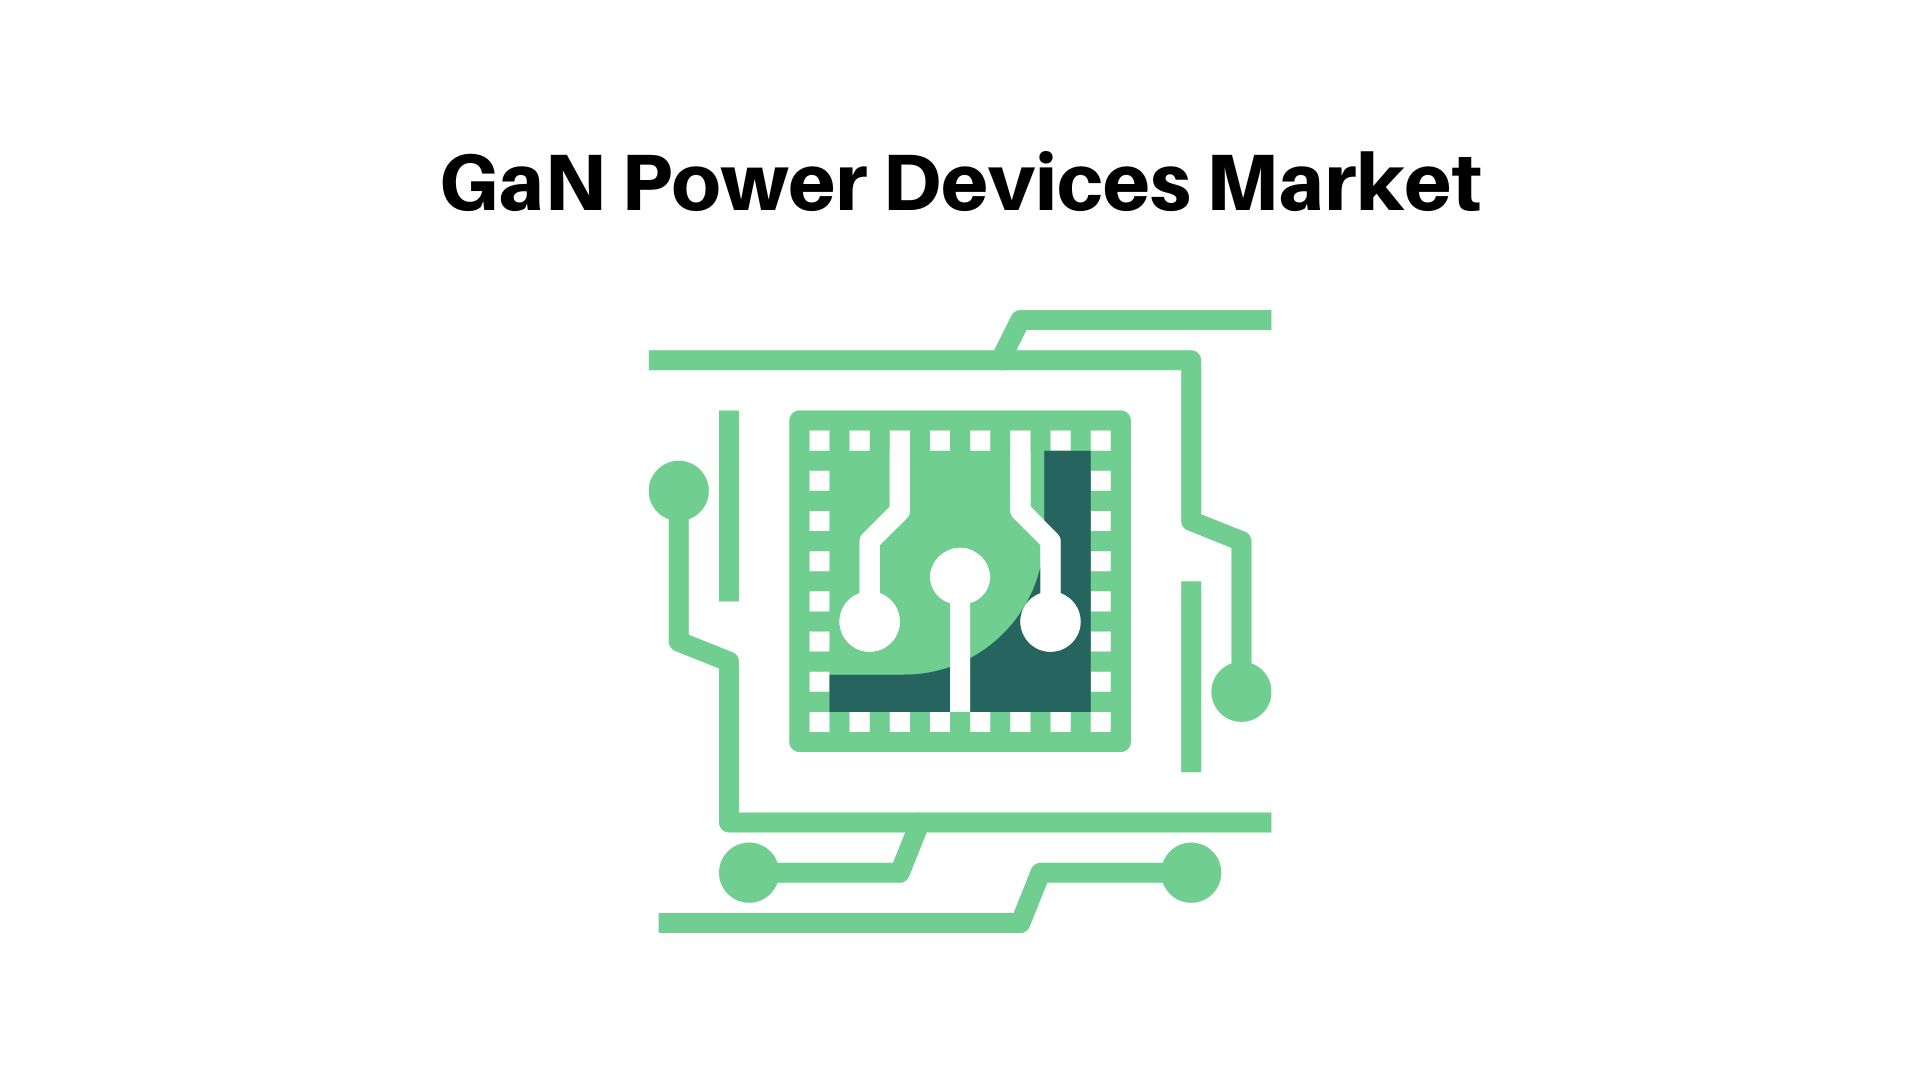 Global GaN Power Devices Market to Witness Steady Growth during the Forecast Period 2019-2028